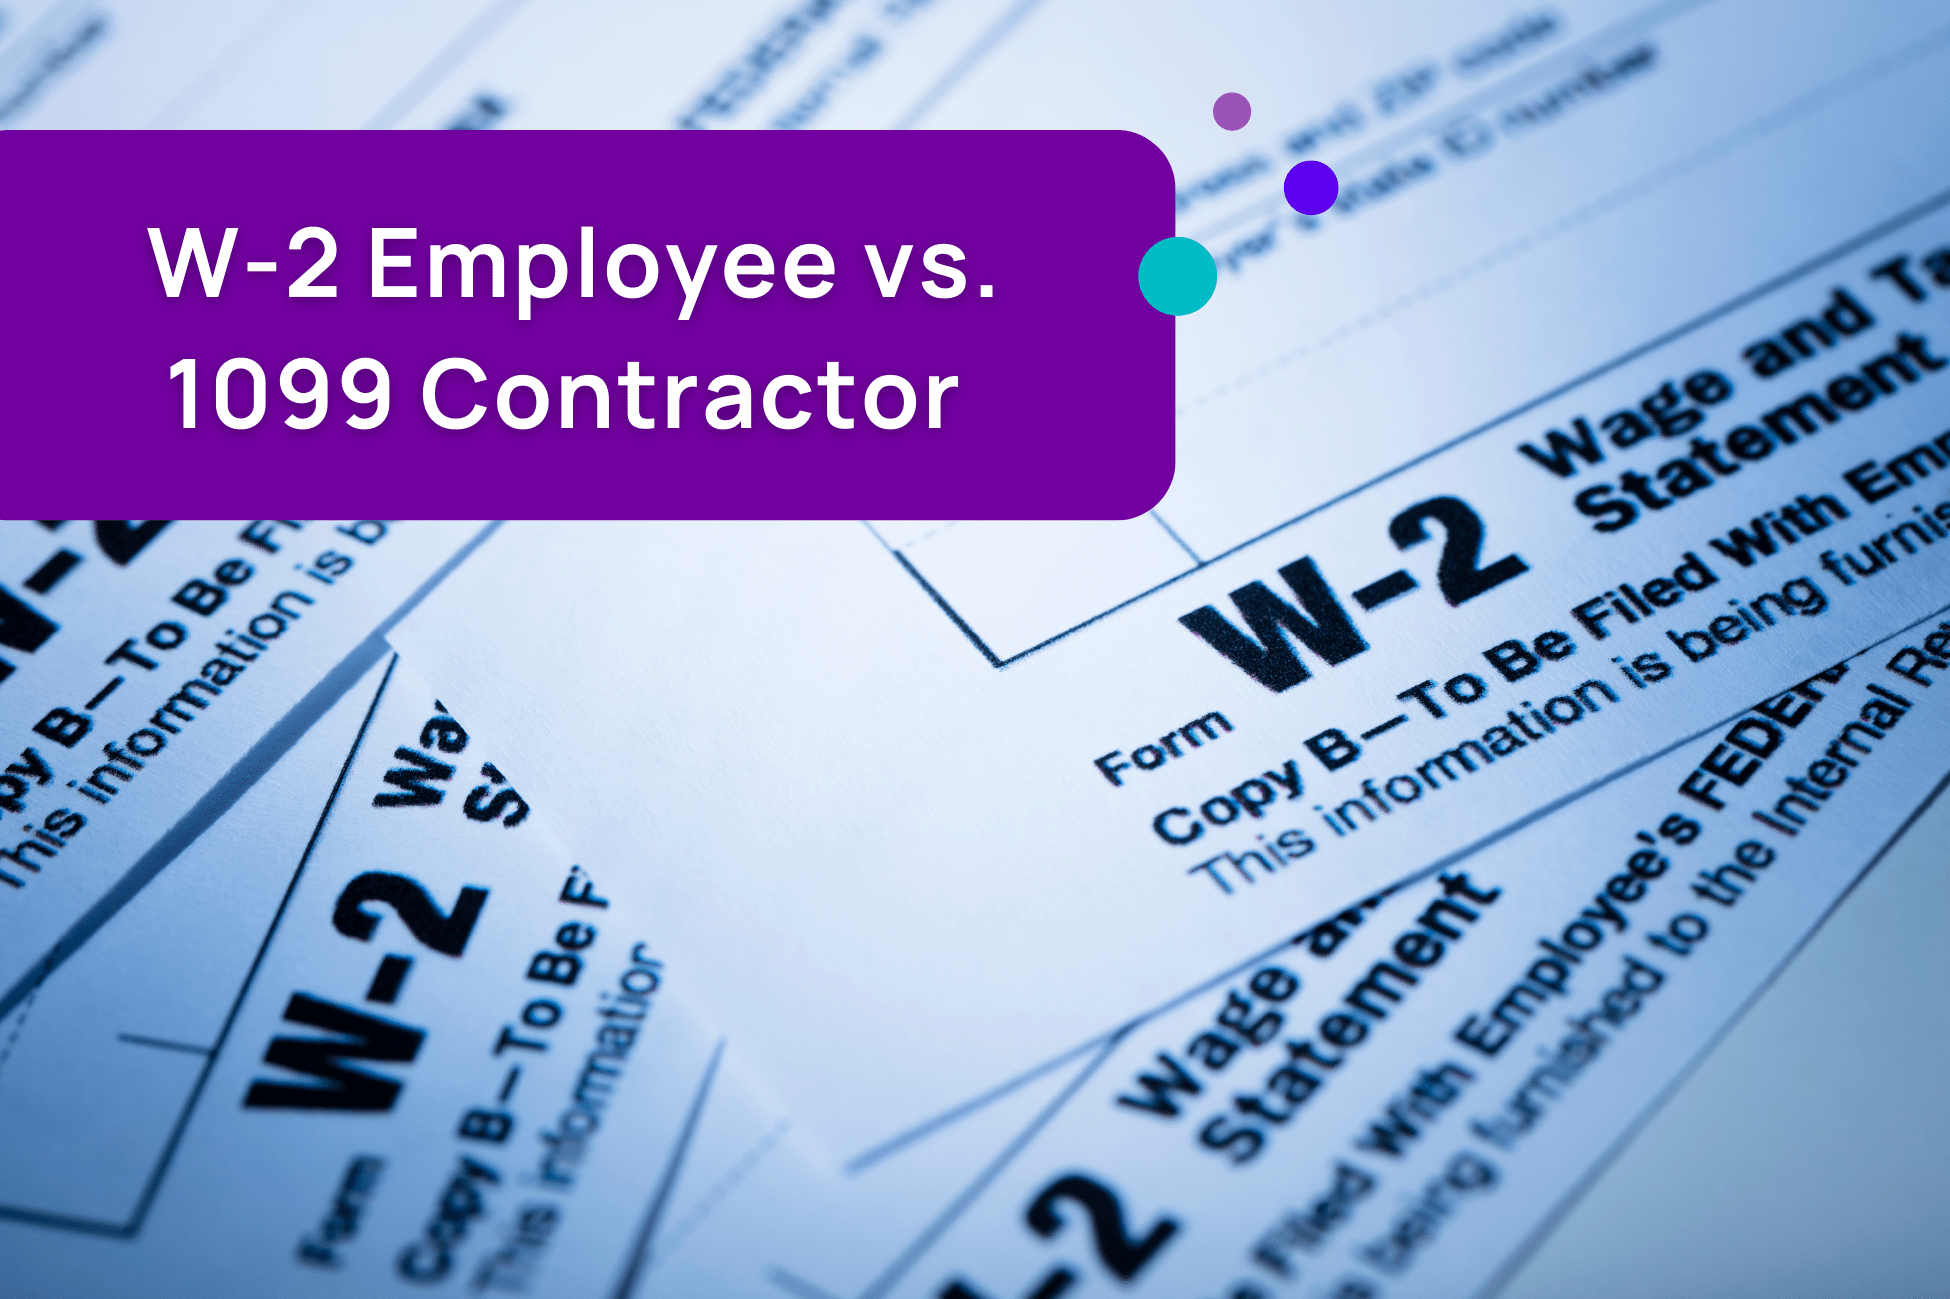 Discover the five key benefits of being a W-2 employee versus a 1099 contractor.